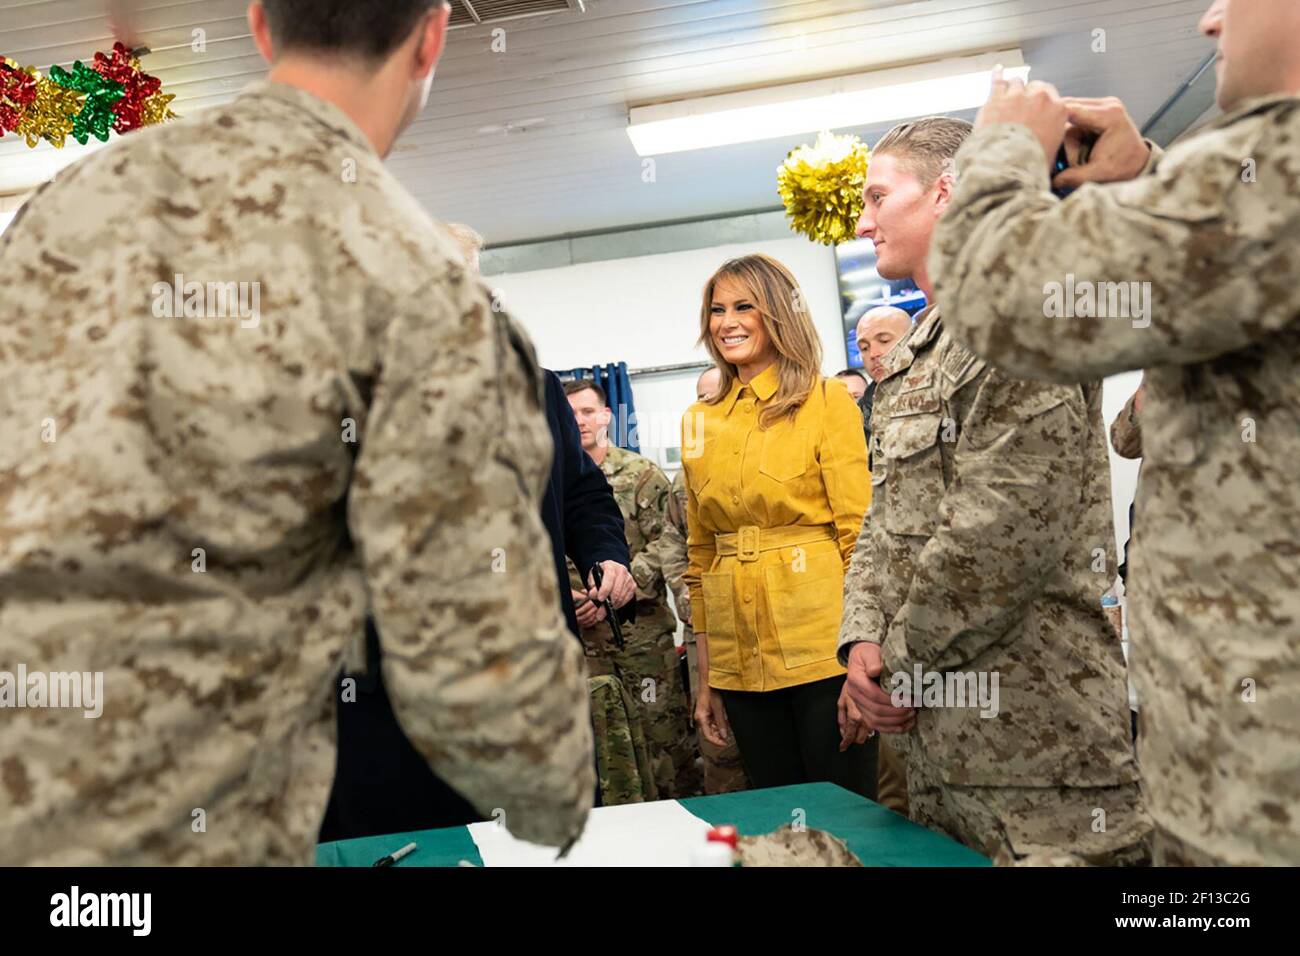 President Donald Trump and First Lady Melania Trump shake hands and speak with U.S. troops Wednesday December 26 2018 at the Al-Asad Airbase in Iraq. Stock Photo